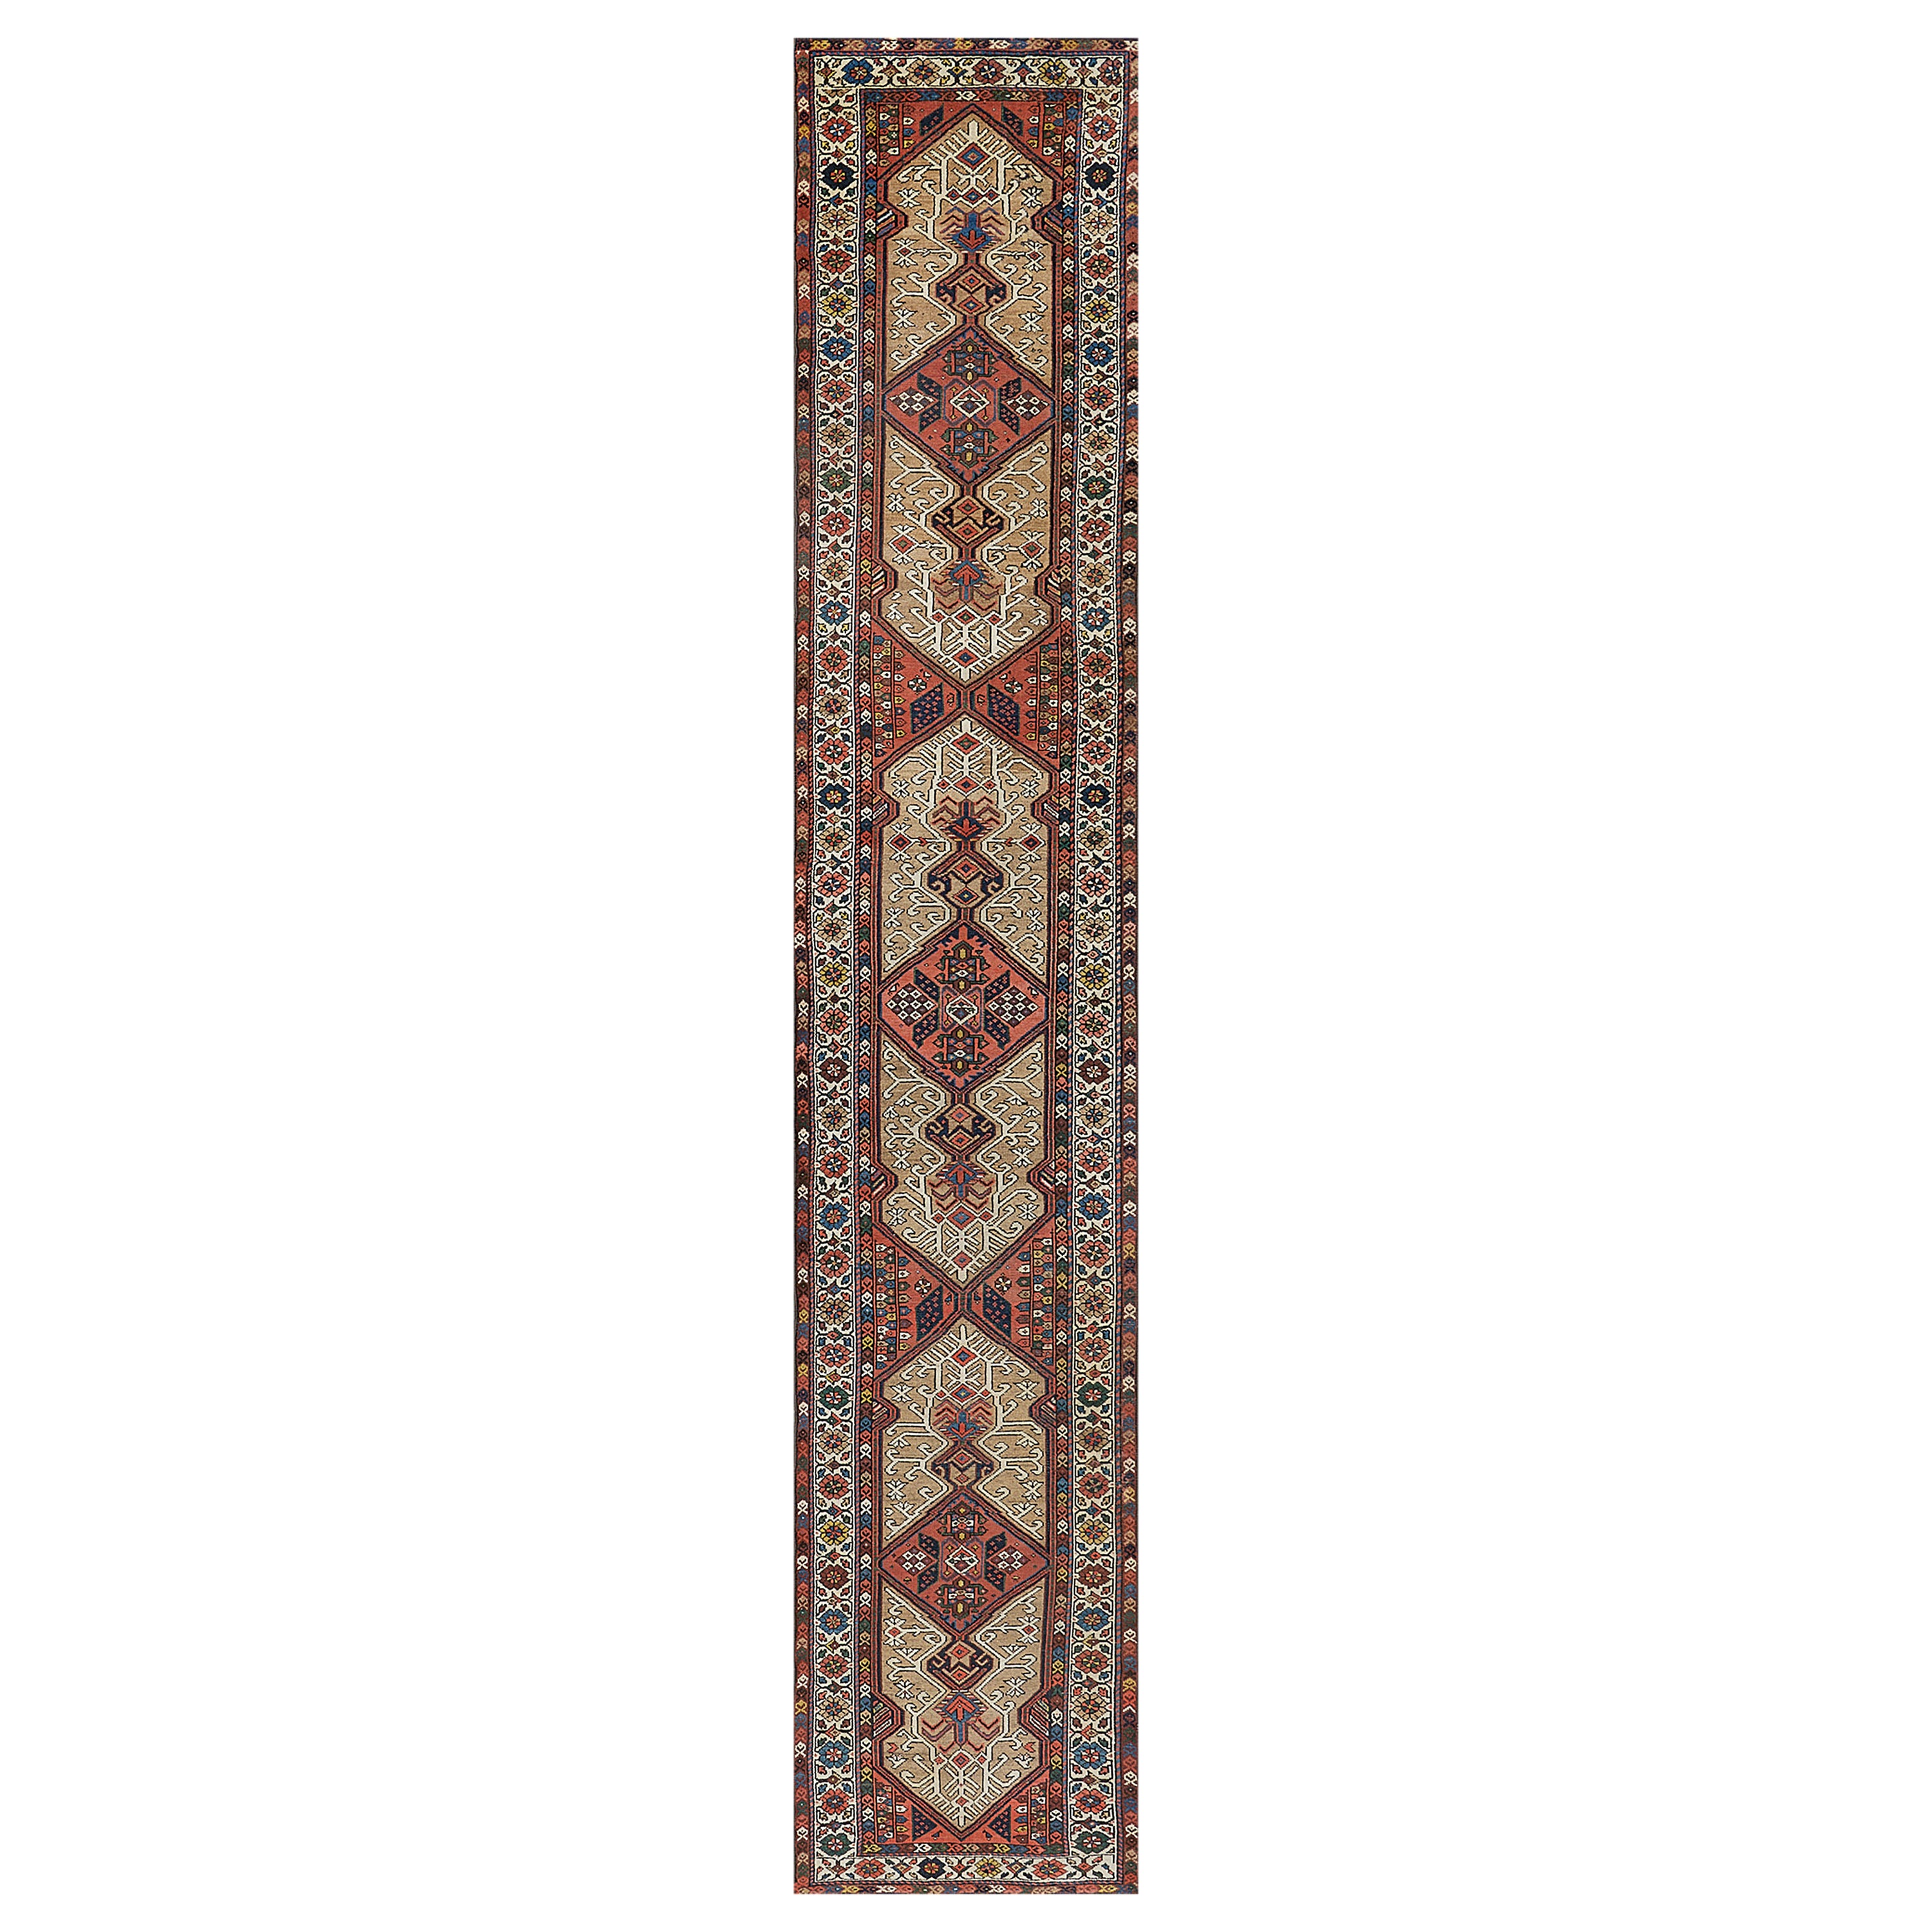 Traditional Hand-Knotted Persian Wool Serab Runner